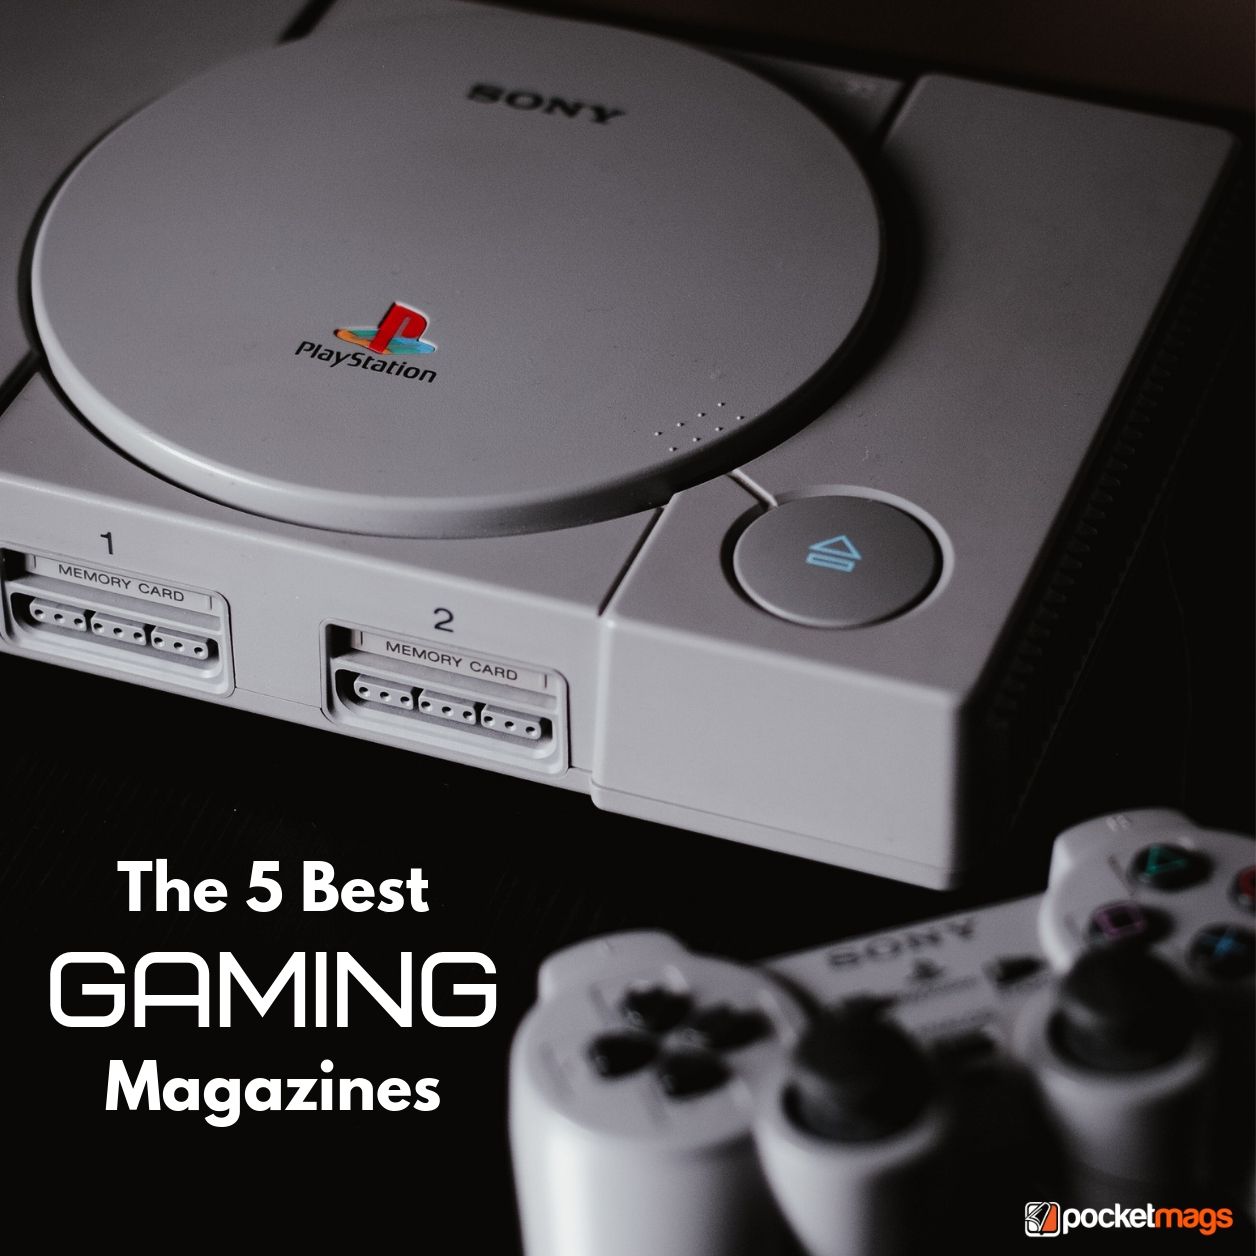 The 5 Best Gaming Magazines